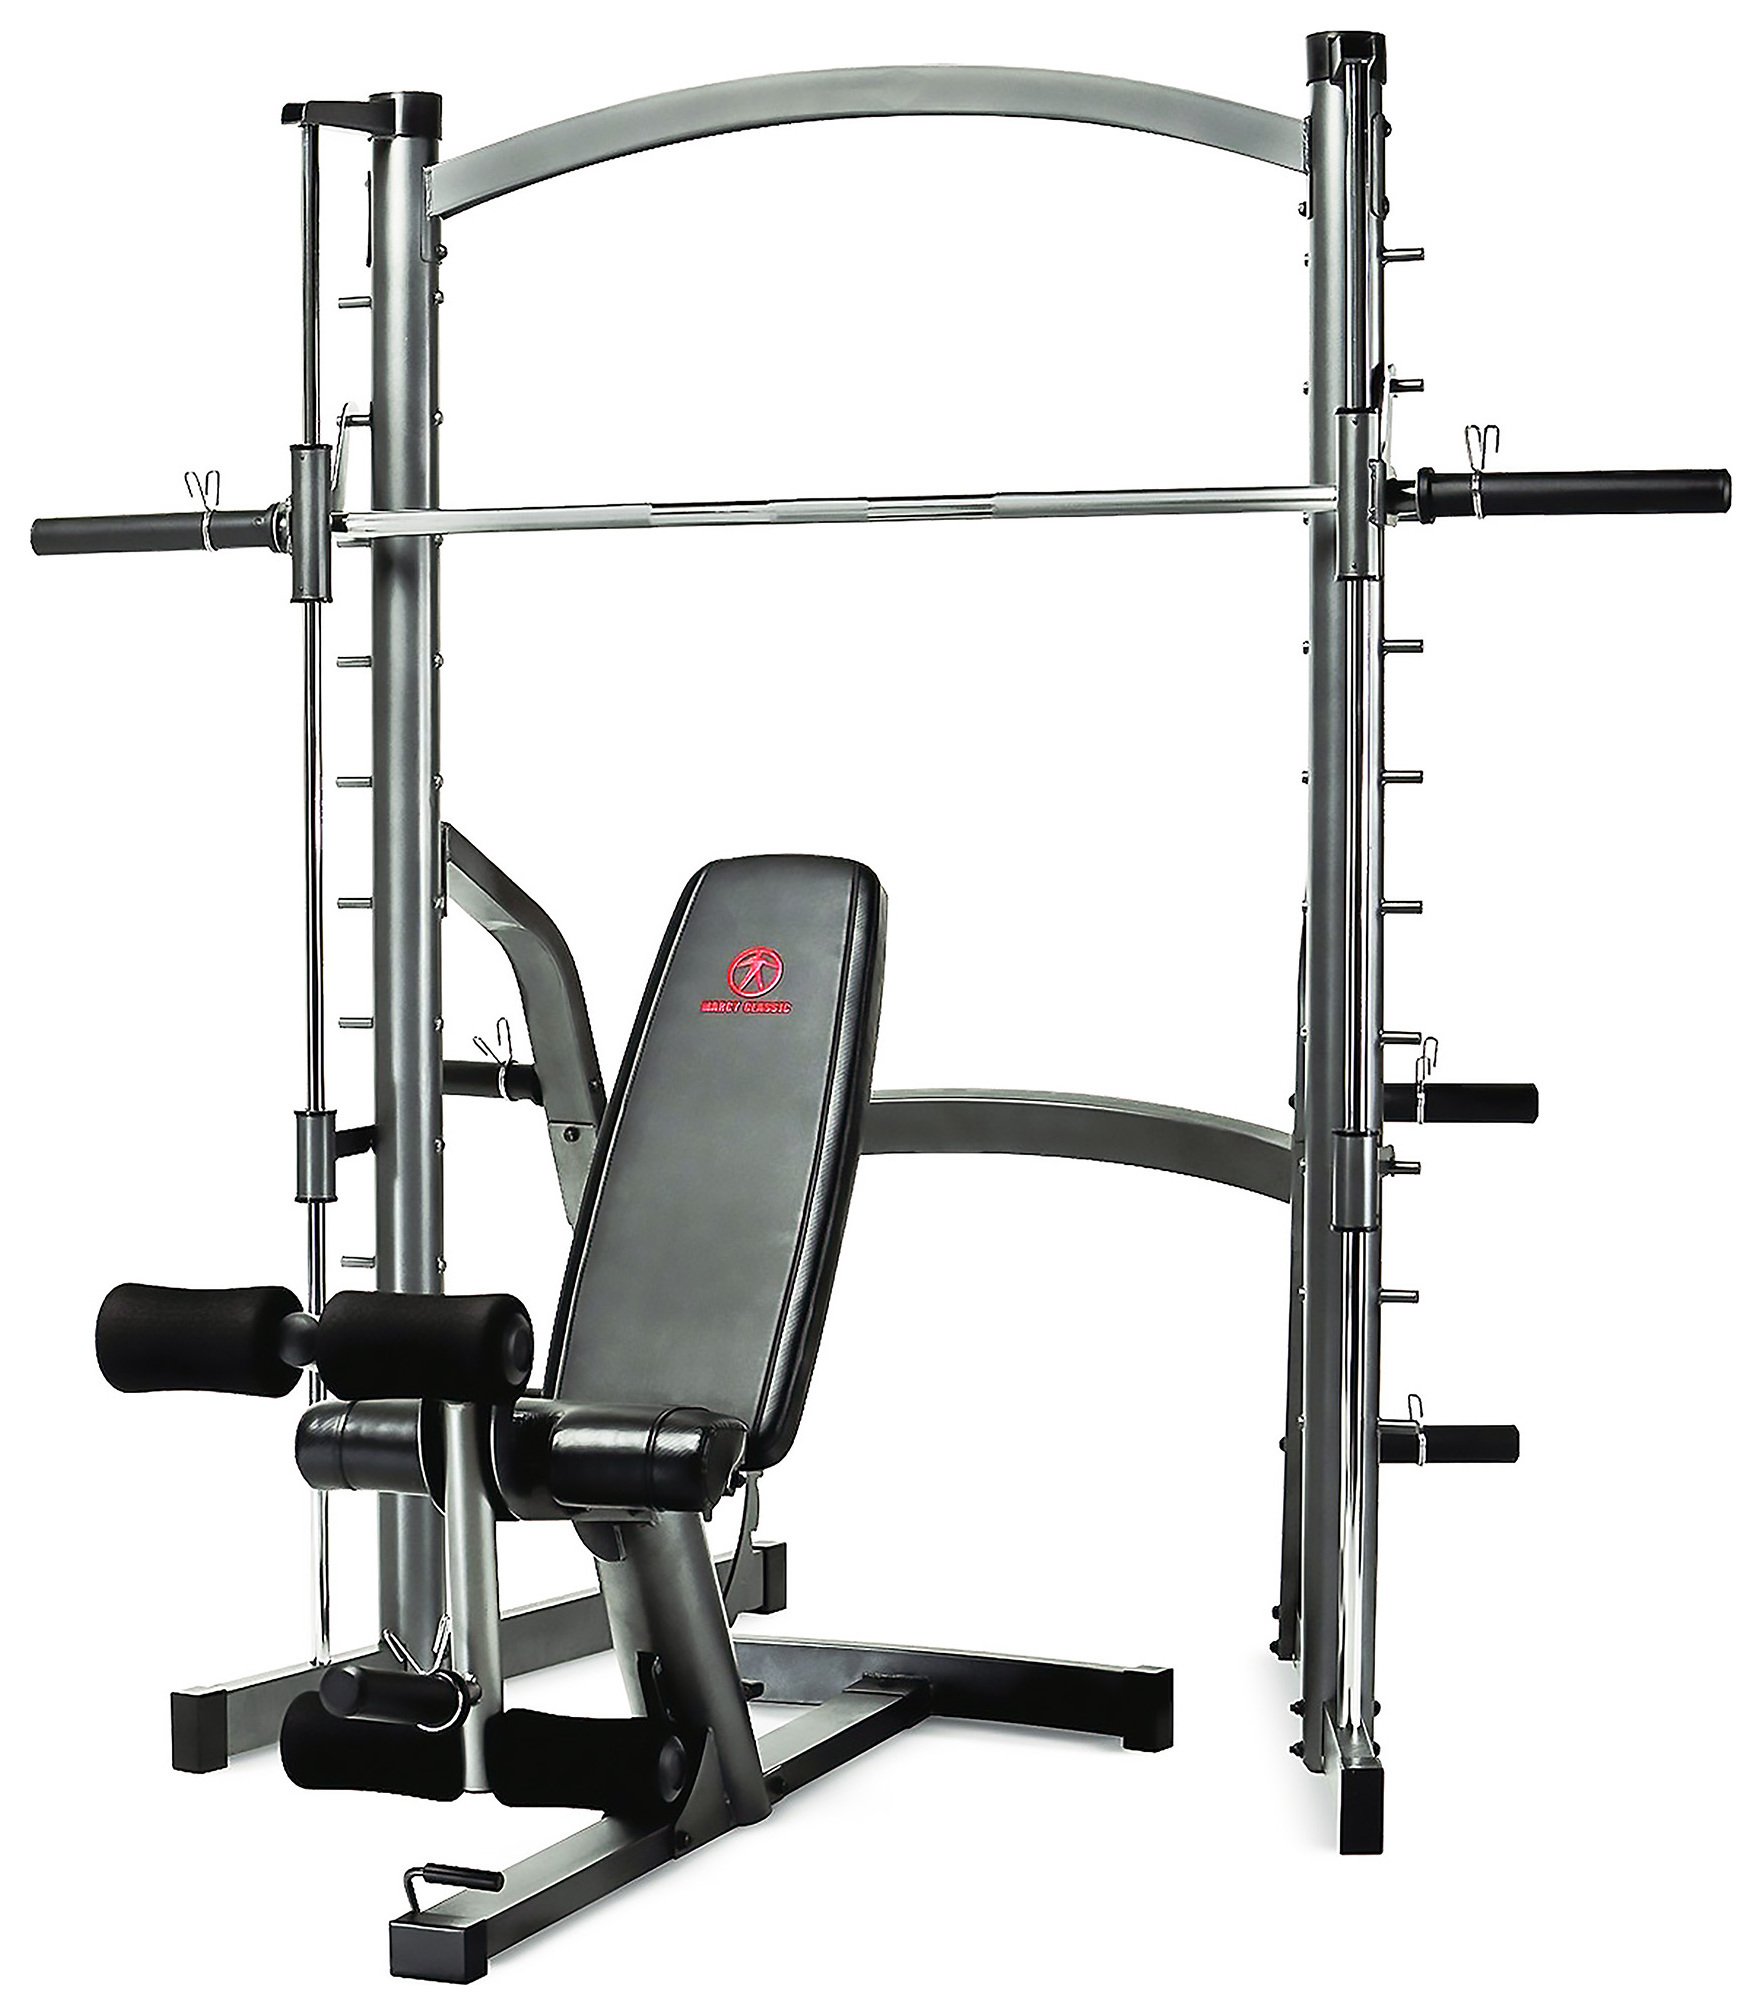 Marcy SM1000 Deluxe Smith Machine review